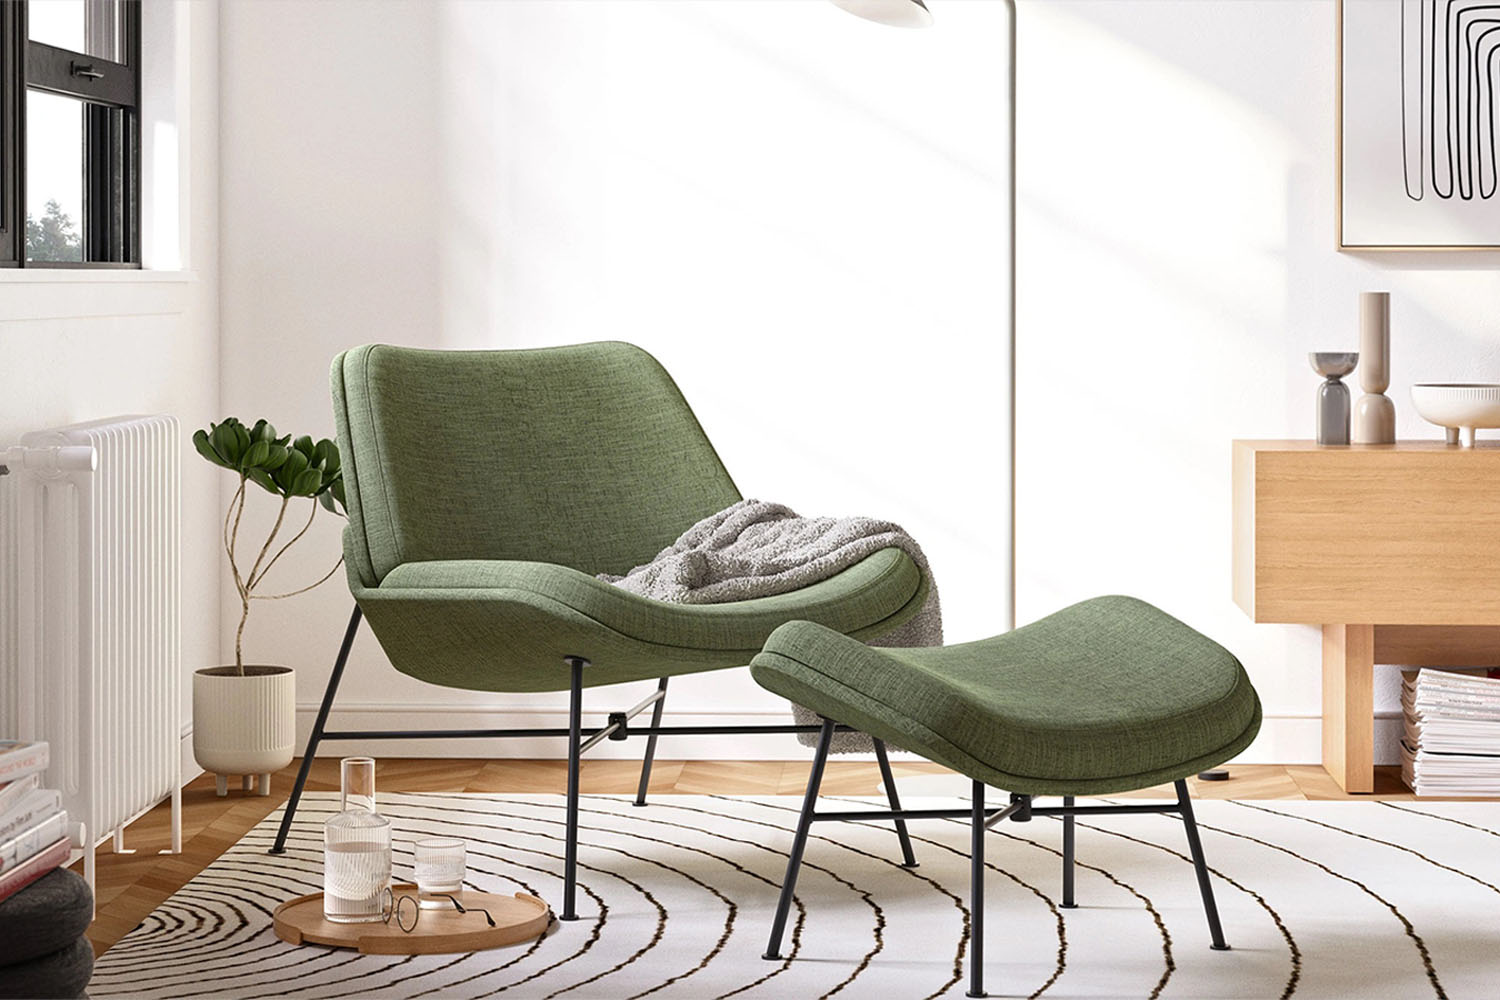 a photo of a green chair and footstool in a well furnished room.